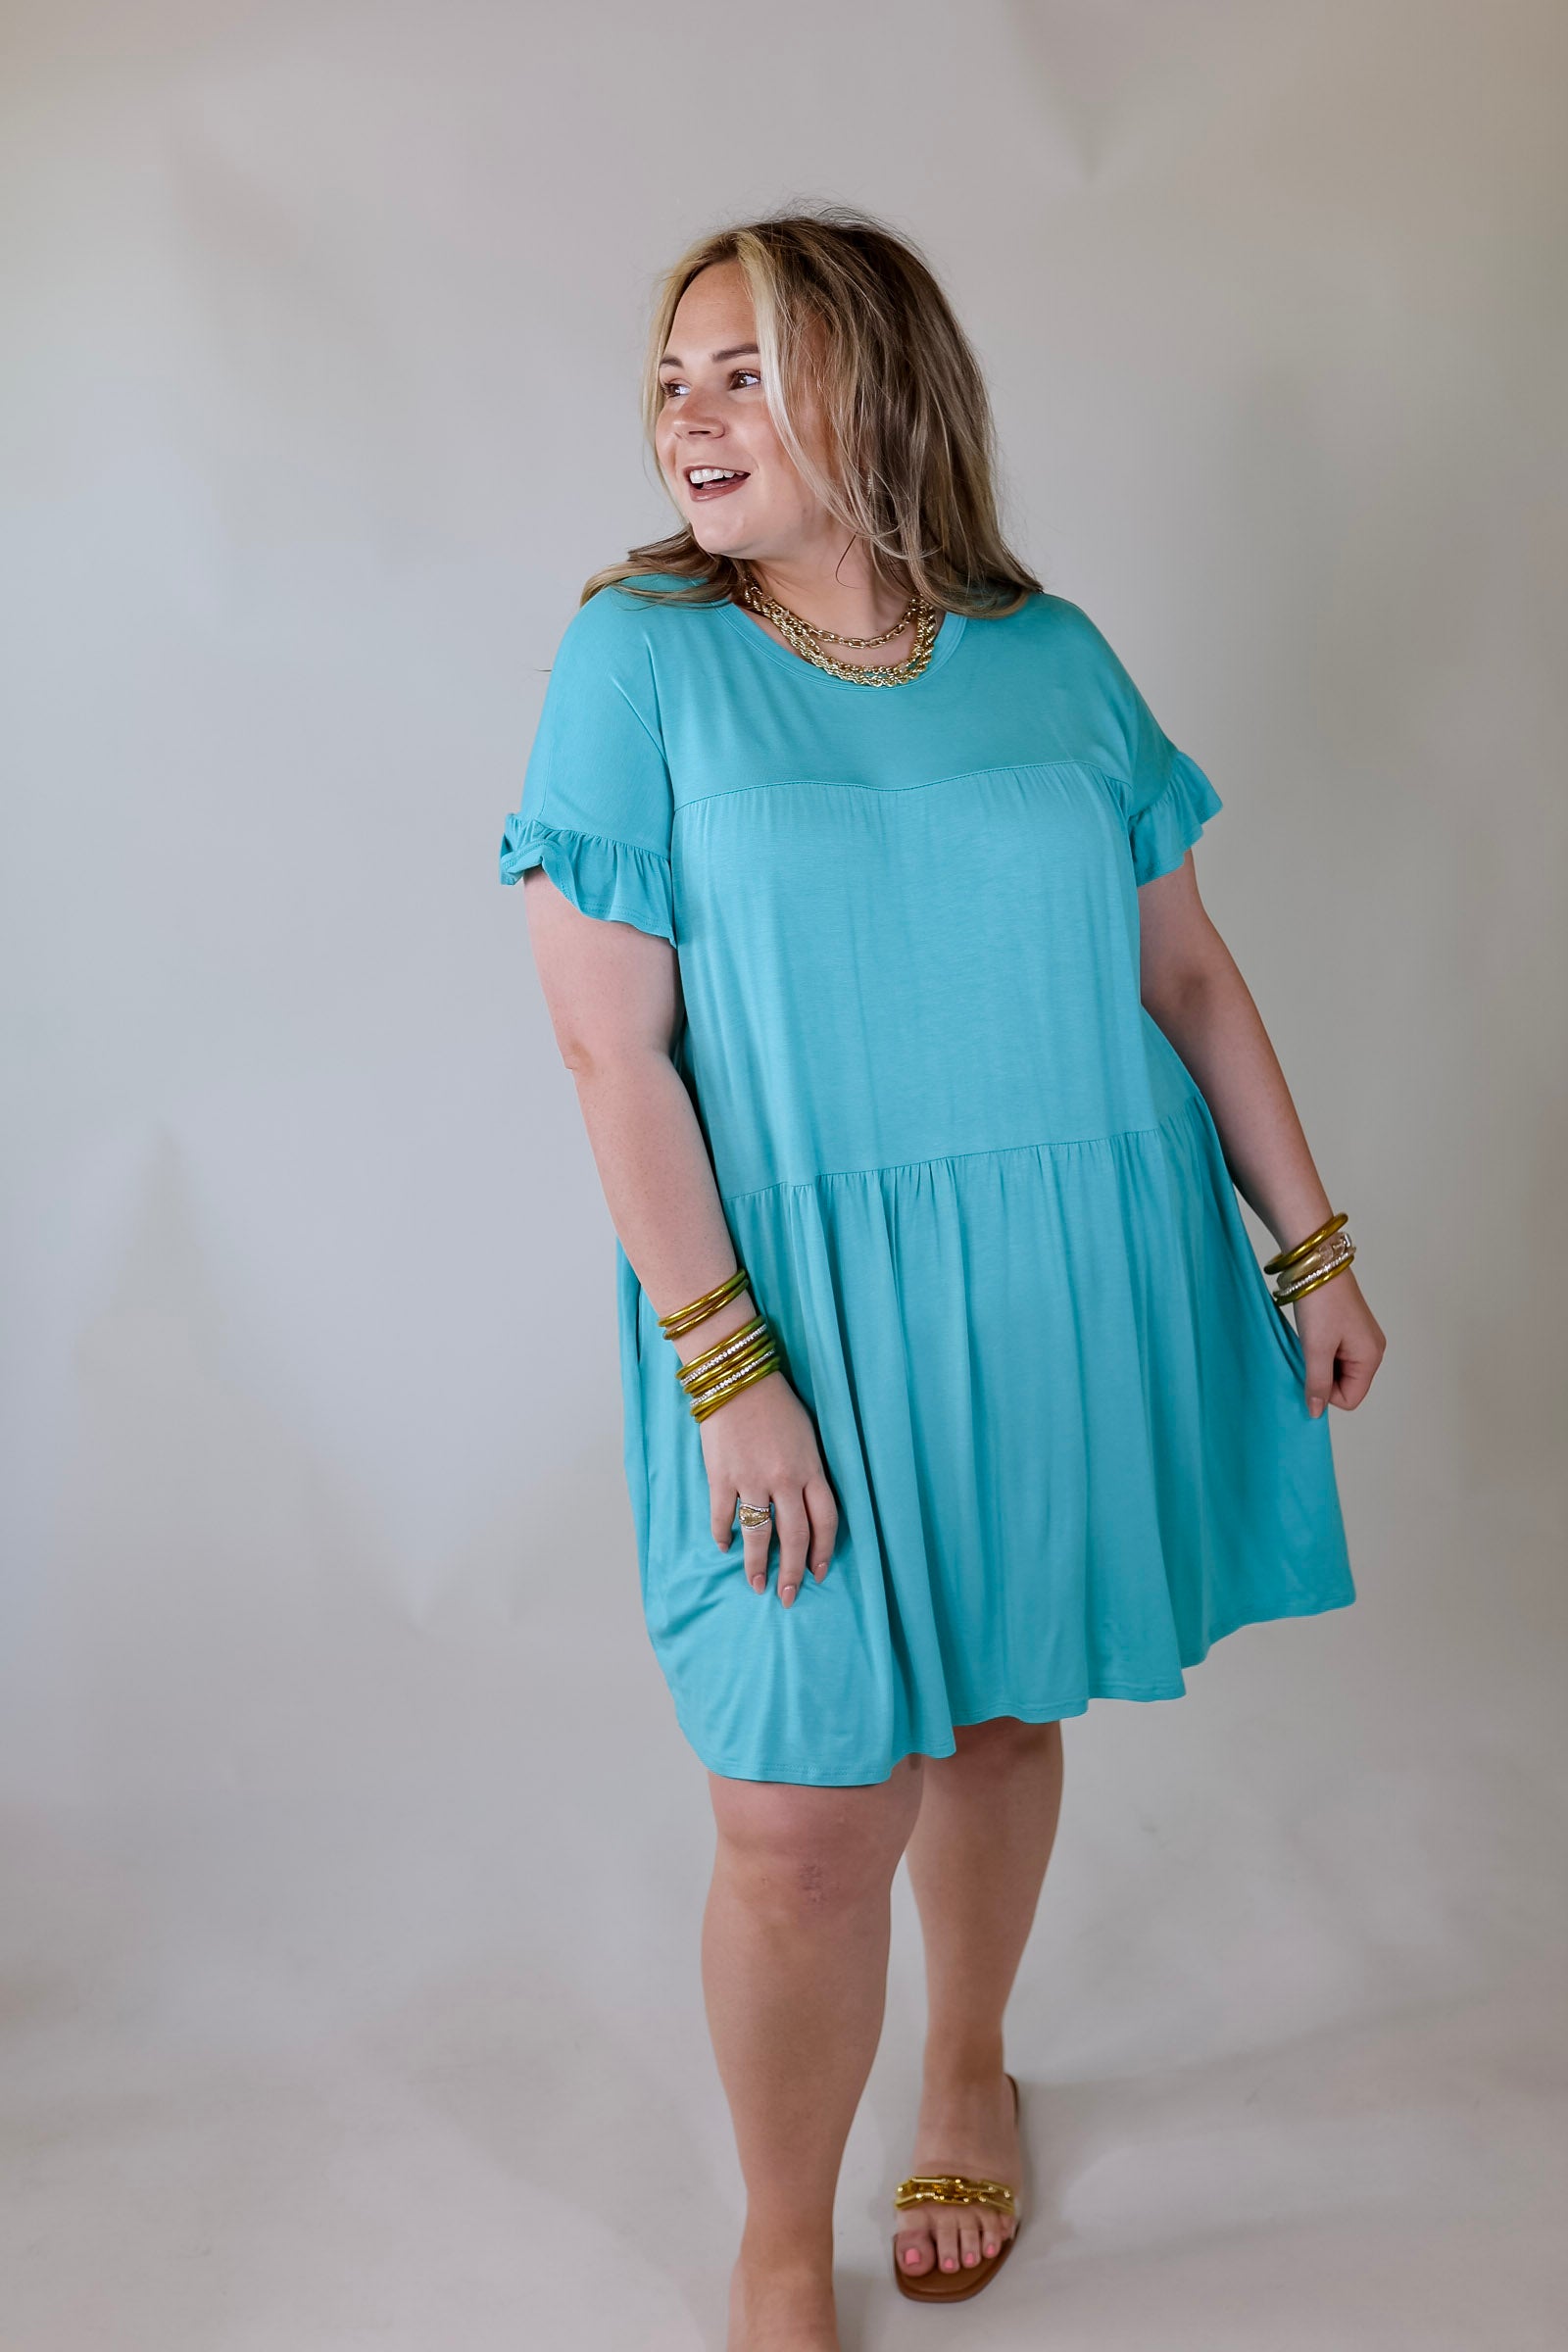 Gorgeous Girly Ruffle Sleeve Tiered Dress in Light Blue - Giddy Up Glamour Boutique